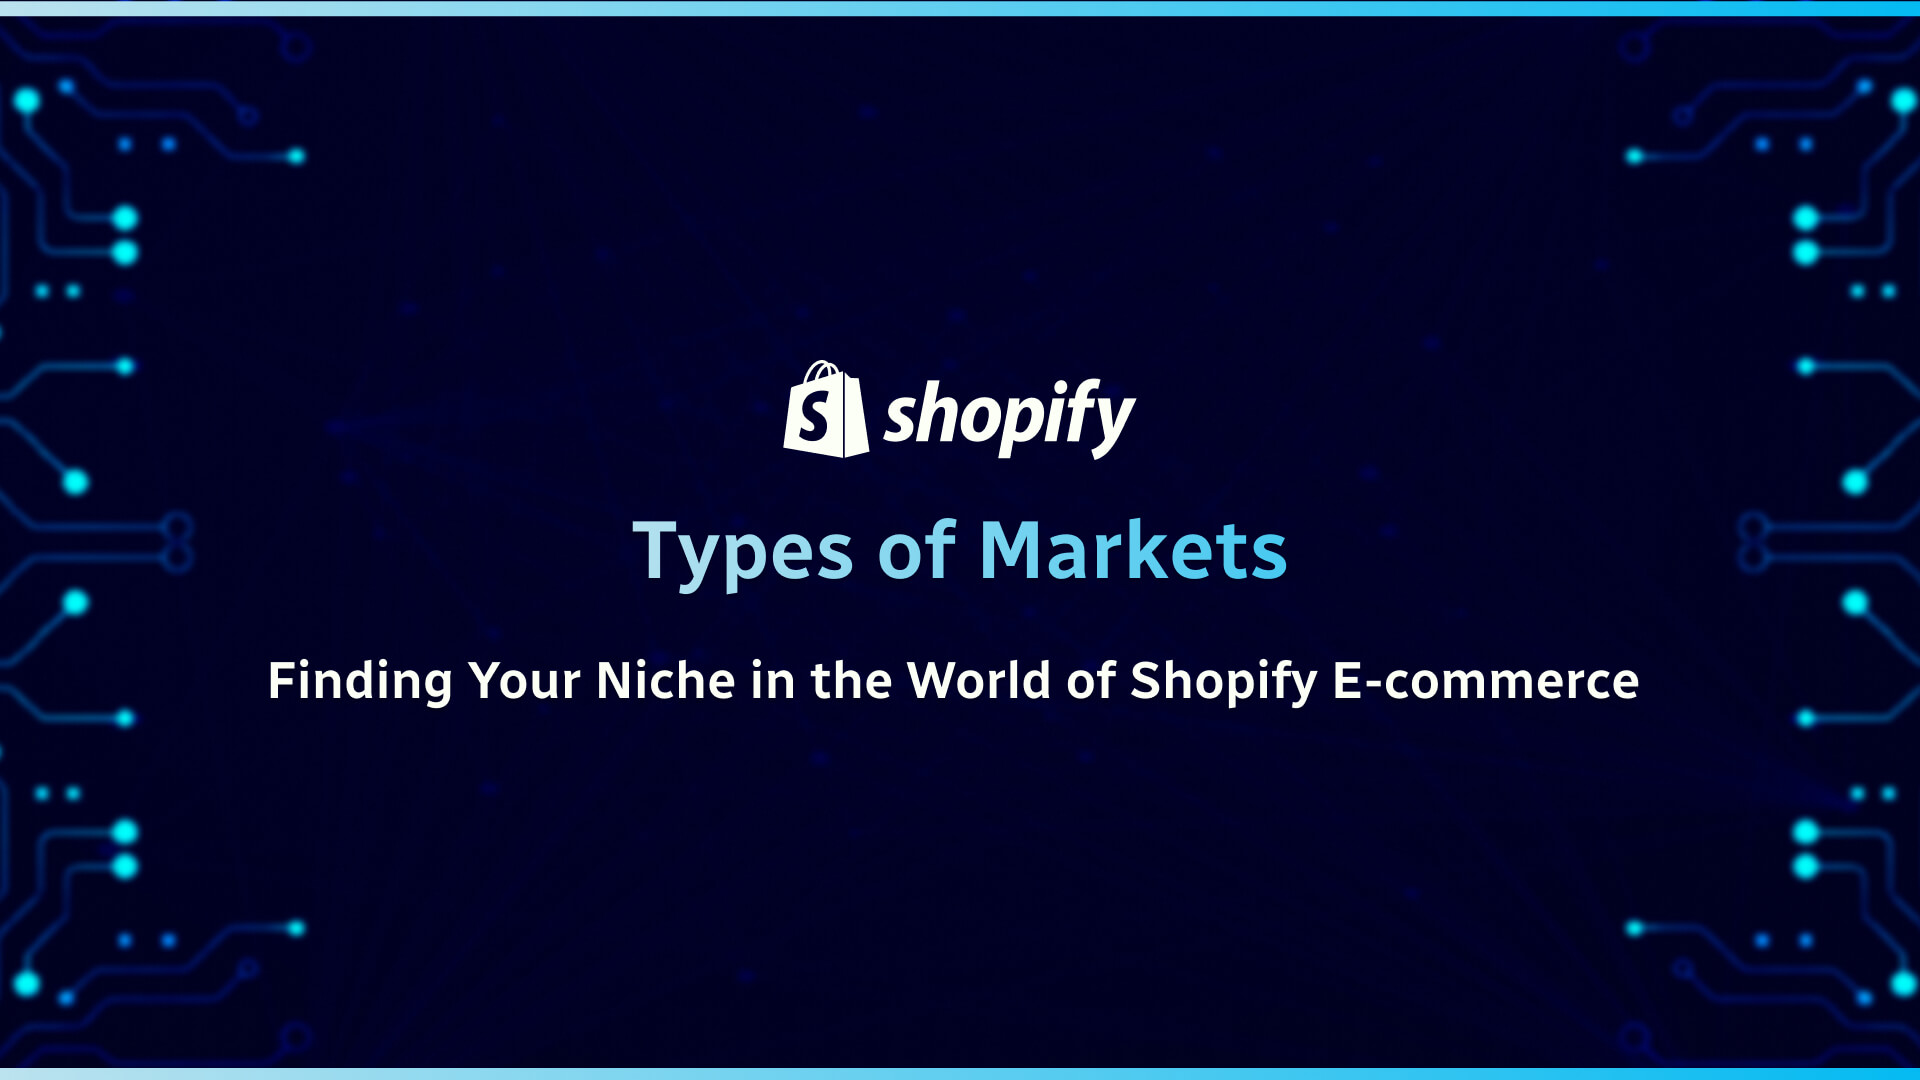 Types of Markets_ Finding Your Niche in the World of Shopify E-commerce